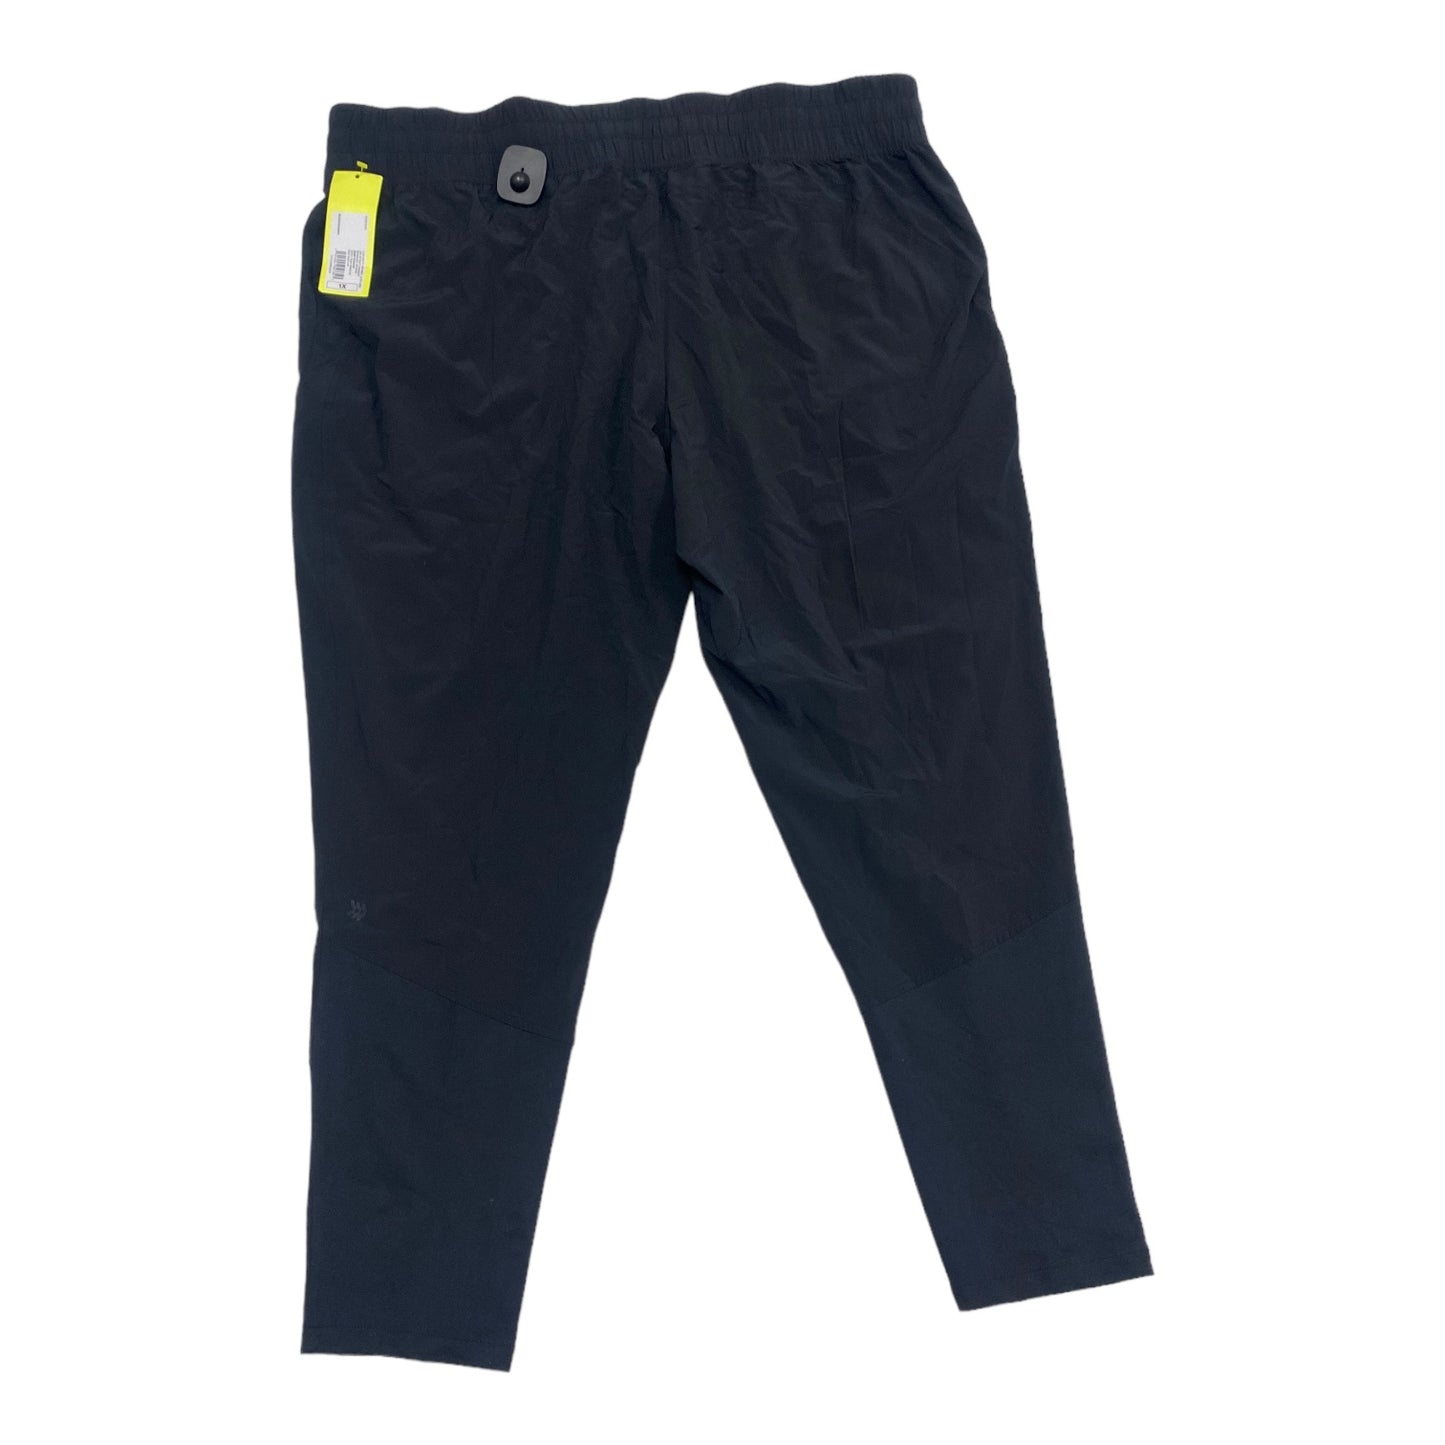 Athletic Pants By All In Motion  Size: 1x